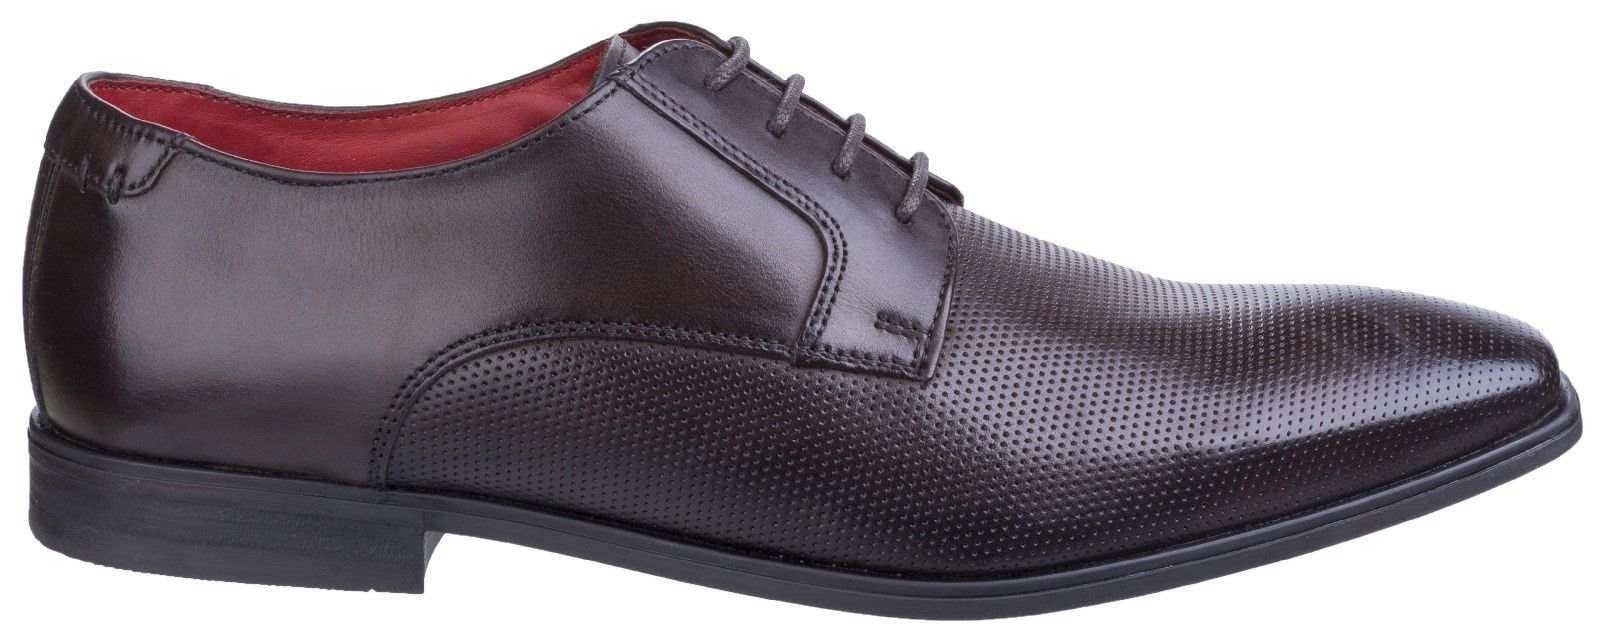 To be worn with confidence. Our Charles Derby shoe style, boasting dimpled detailing on the leather uppers is a Smart/Casual wardrobe essential. Base London mens formal lace up shoe.. 
Leather uppers boasting dimpled detailing.. 
Waxy leather uppers.. 
Featured in the Base London Fashionista Range..